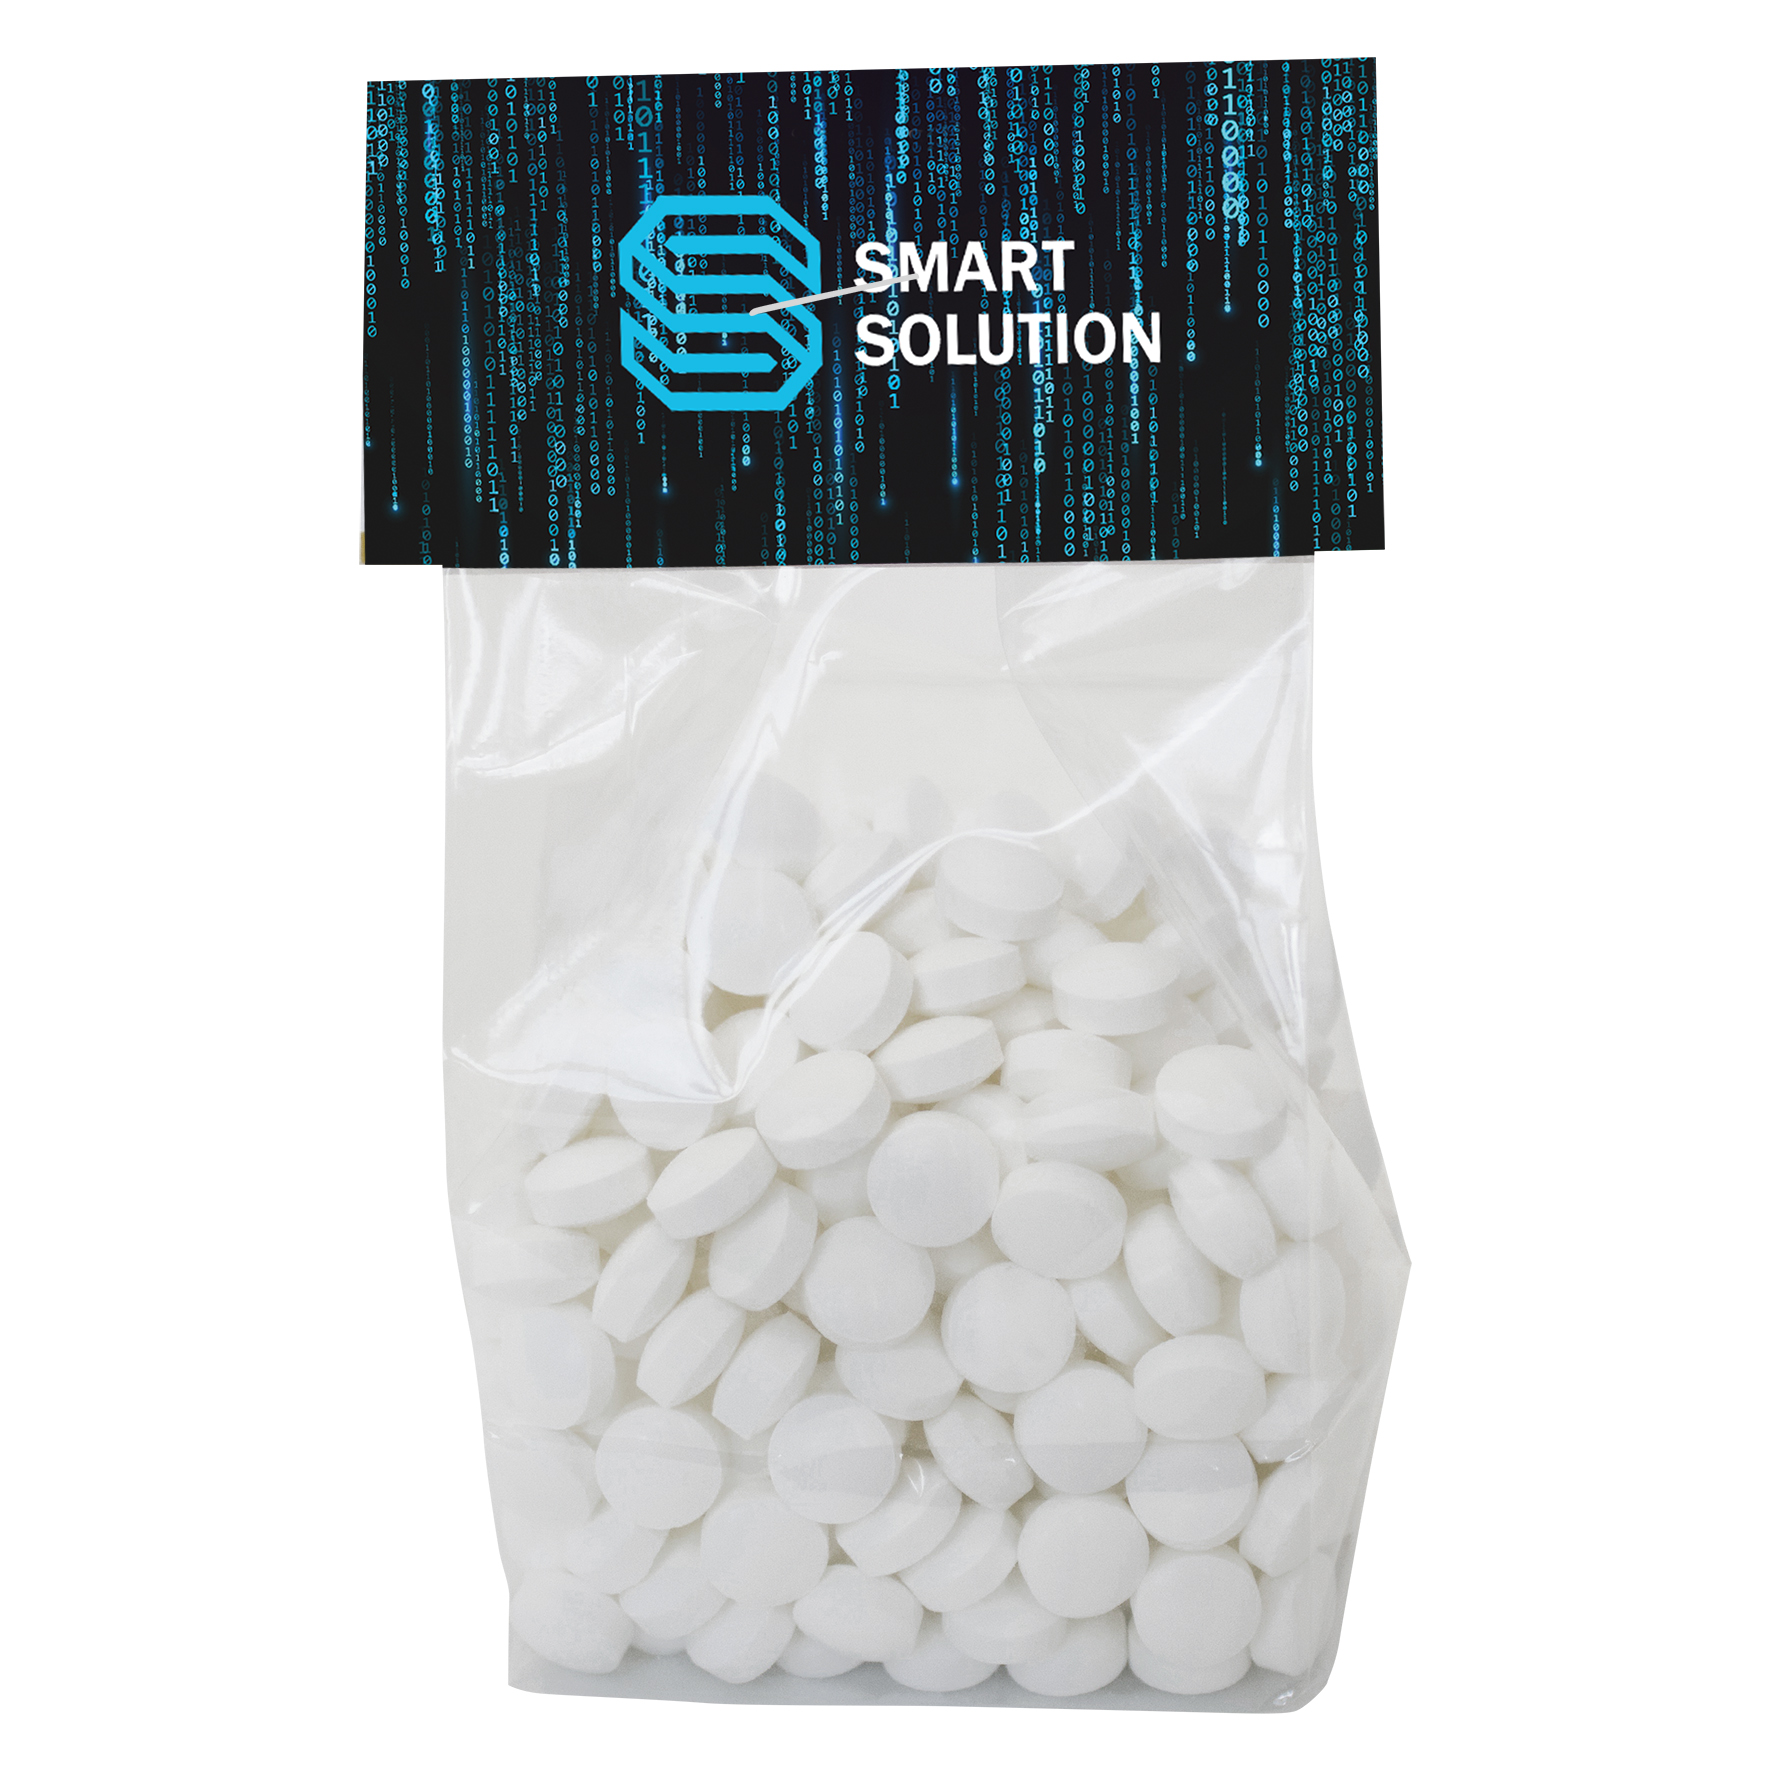 c 0630dmi 00 02 - 130gr Bag with a card base and printed header board filled with dextrose mints